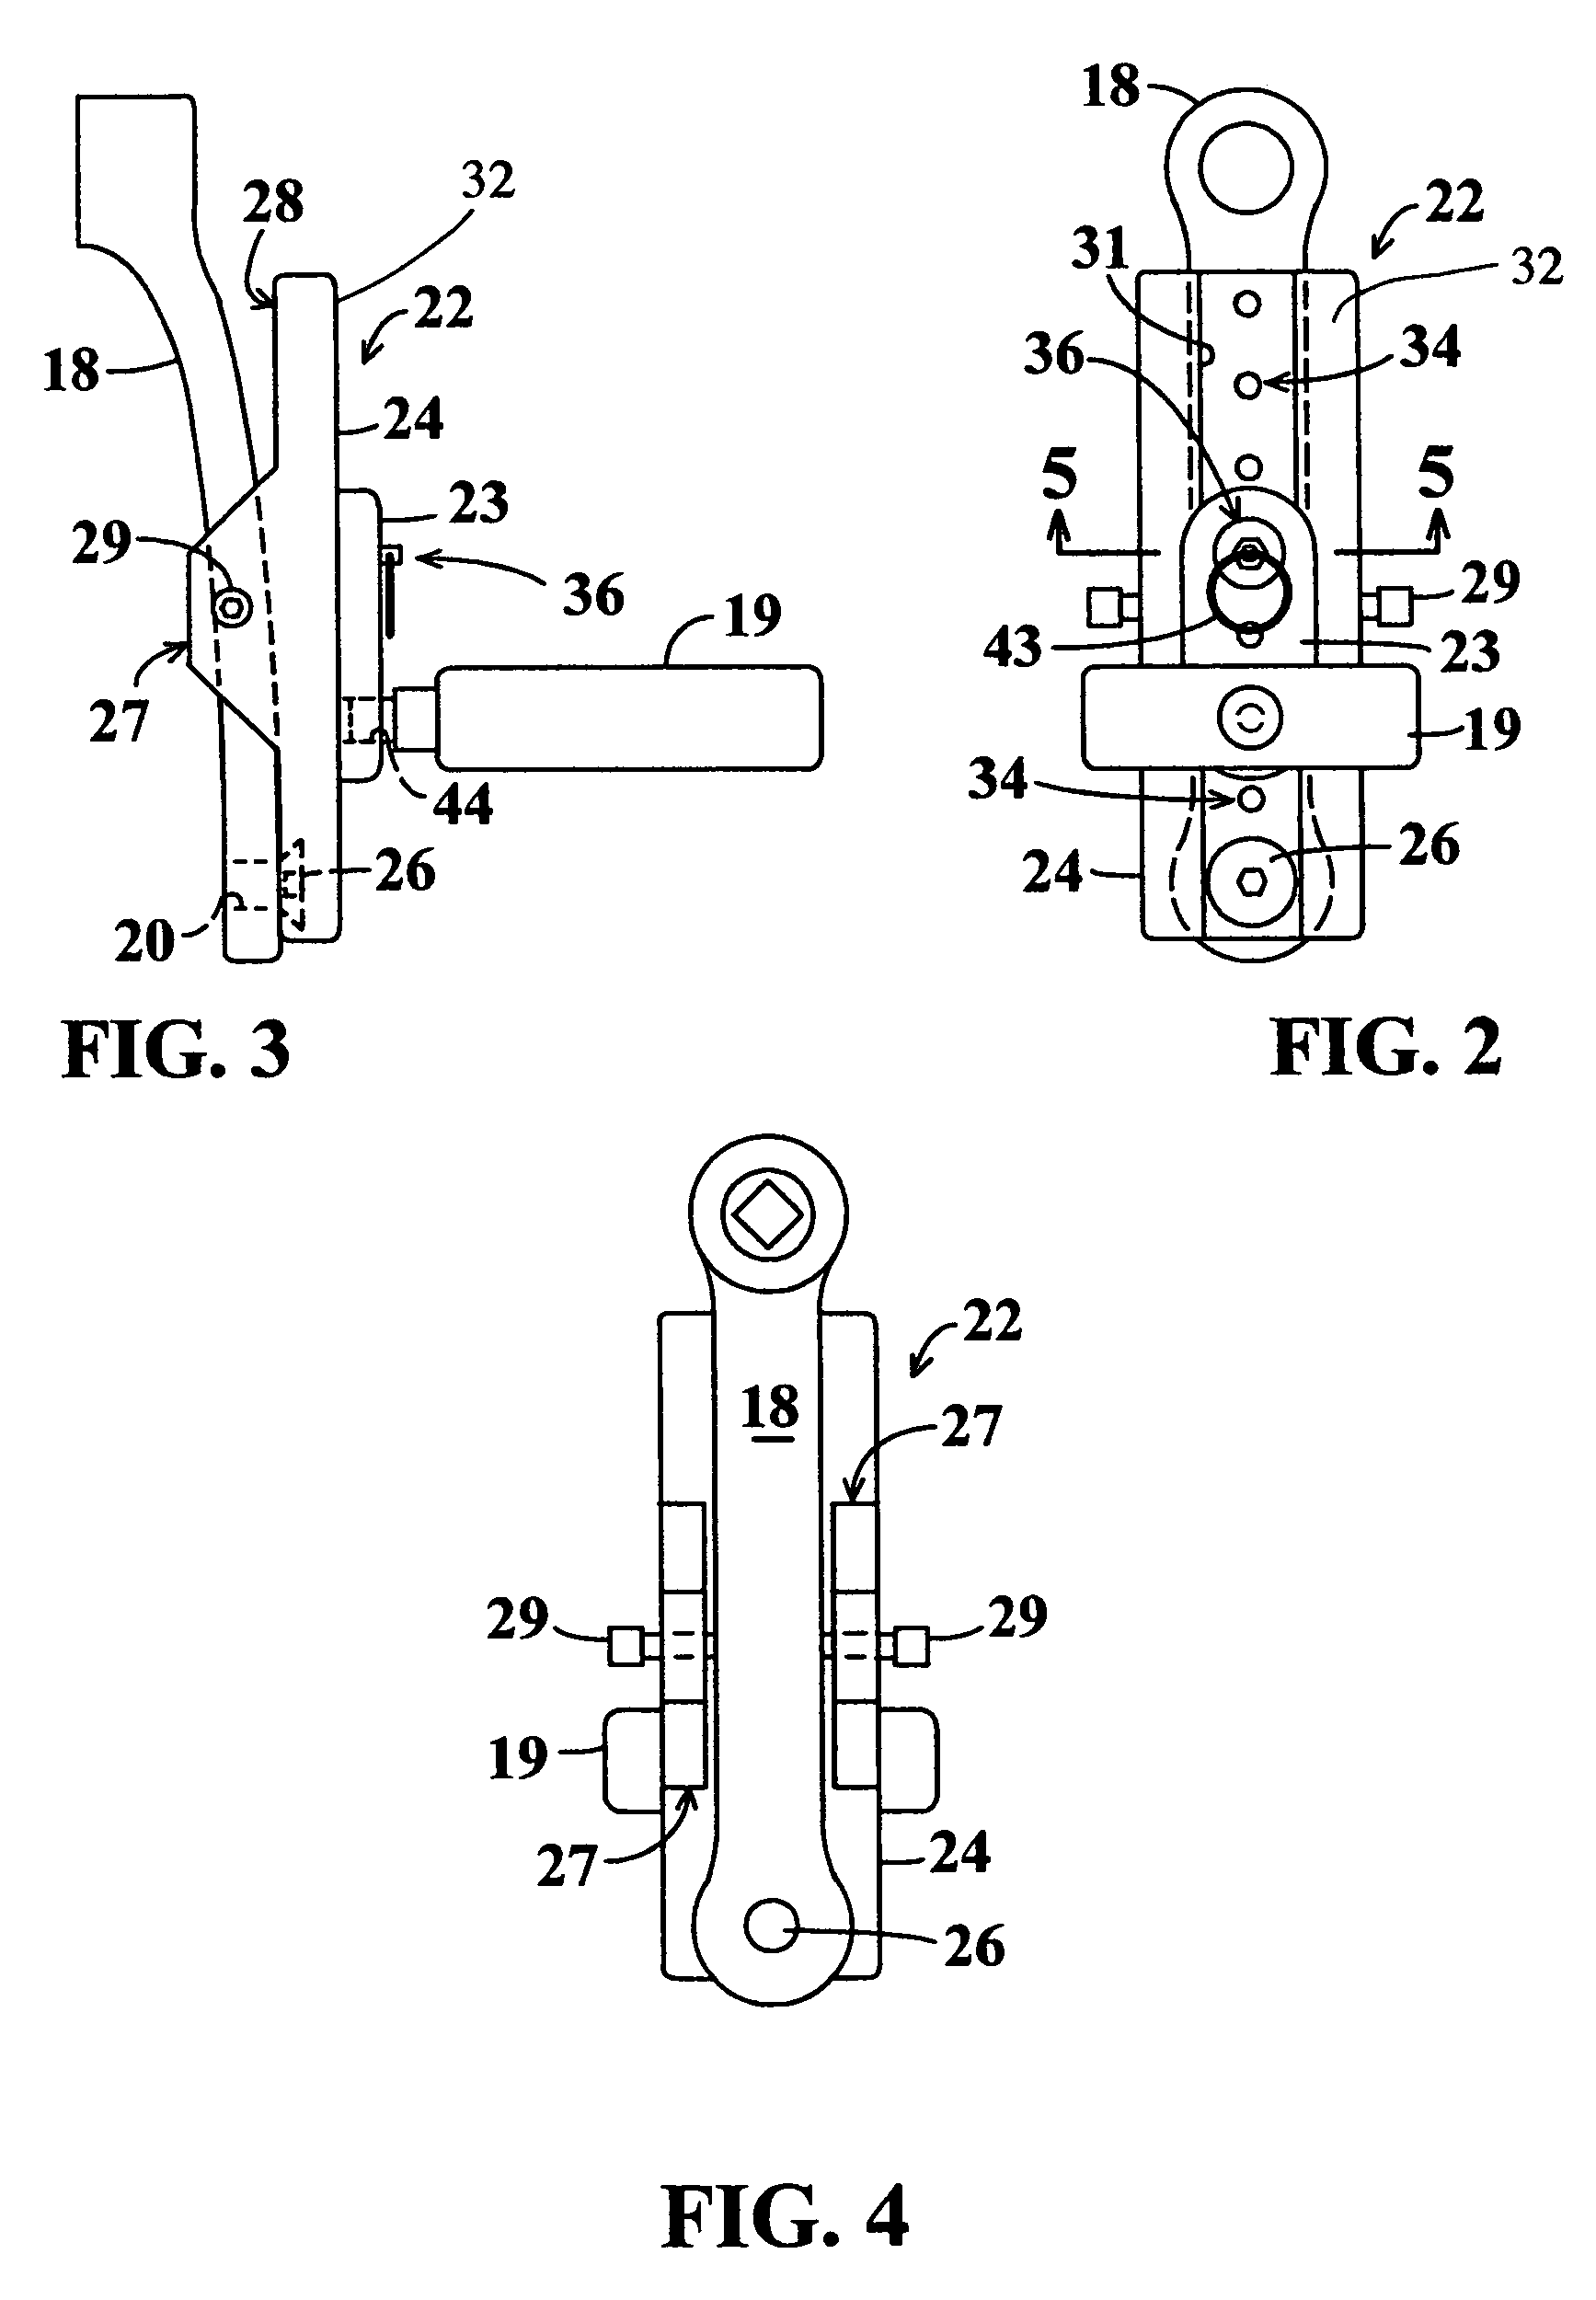 Pedal stroke adjuster for bicycles or the like